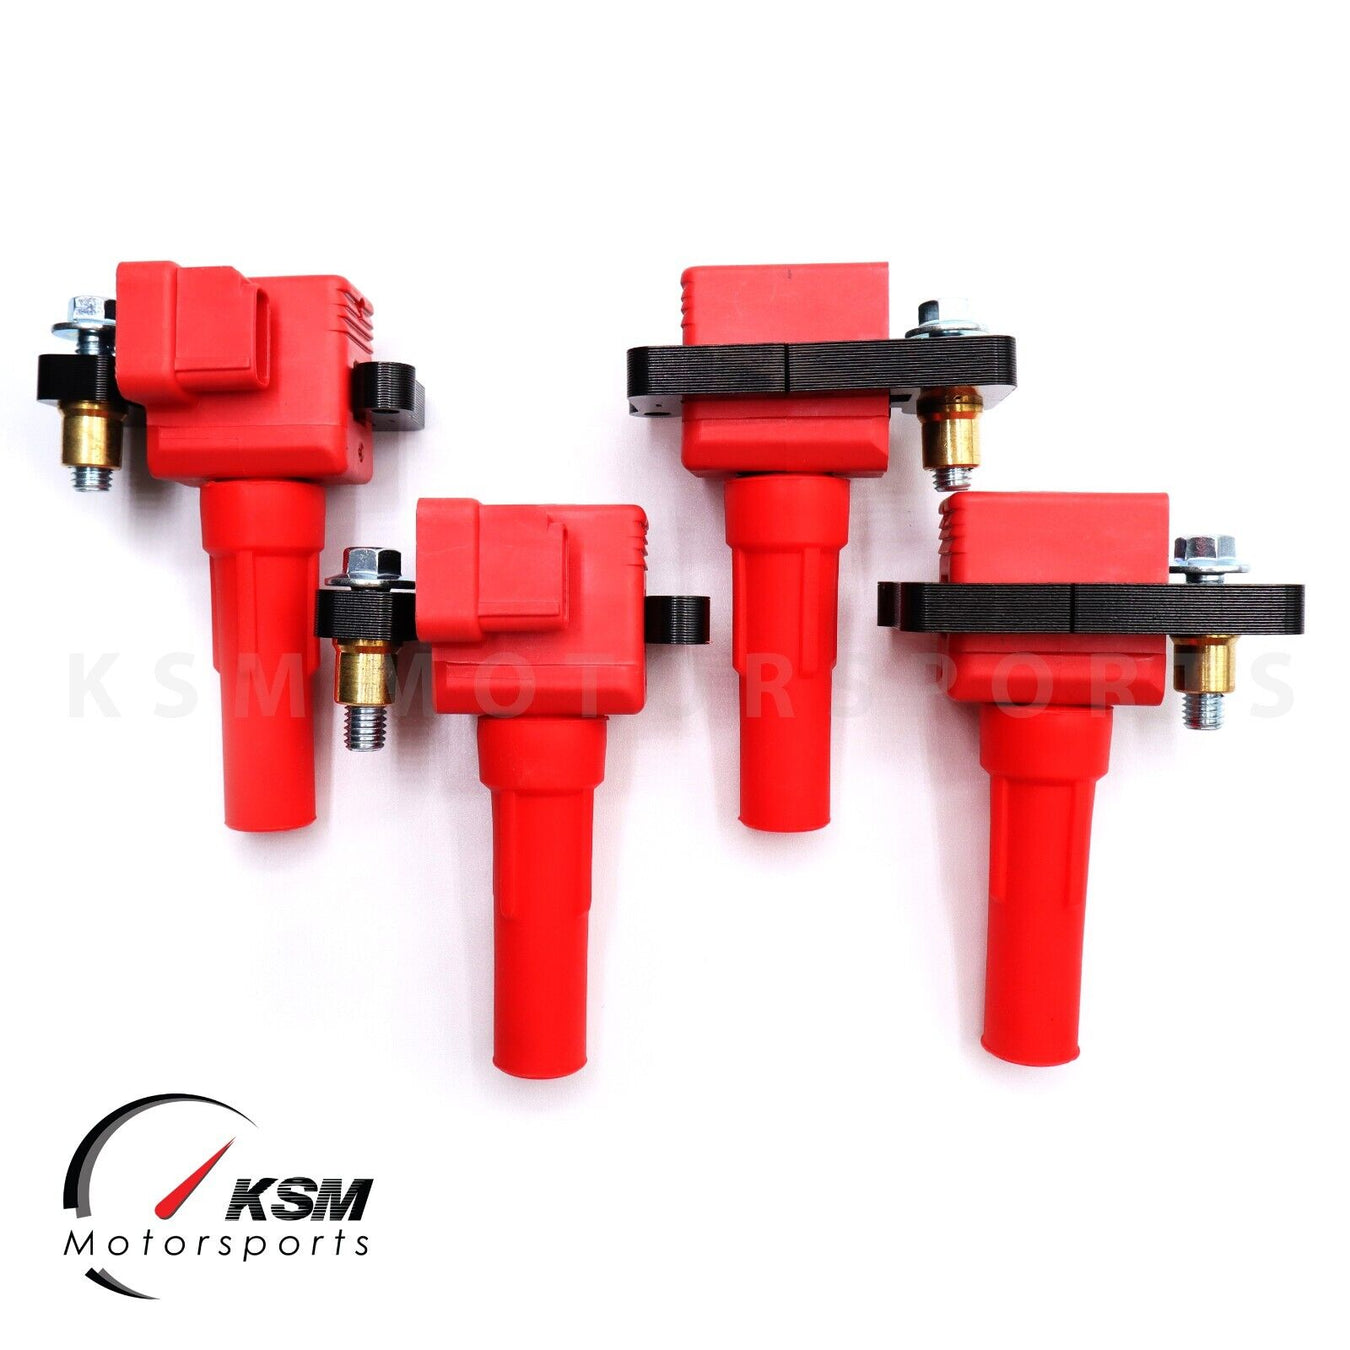 Performance Ignition Coils